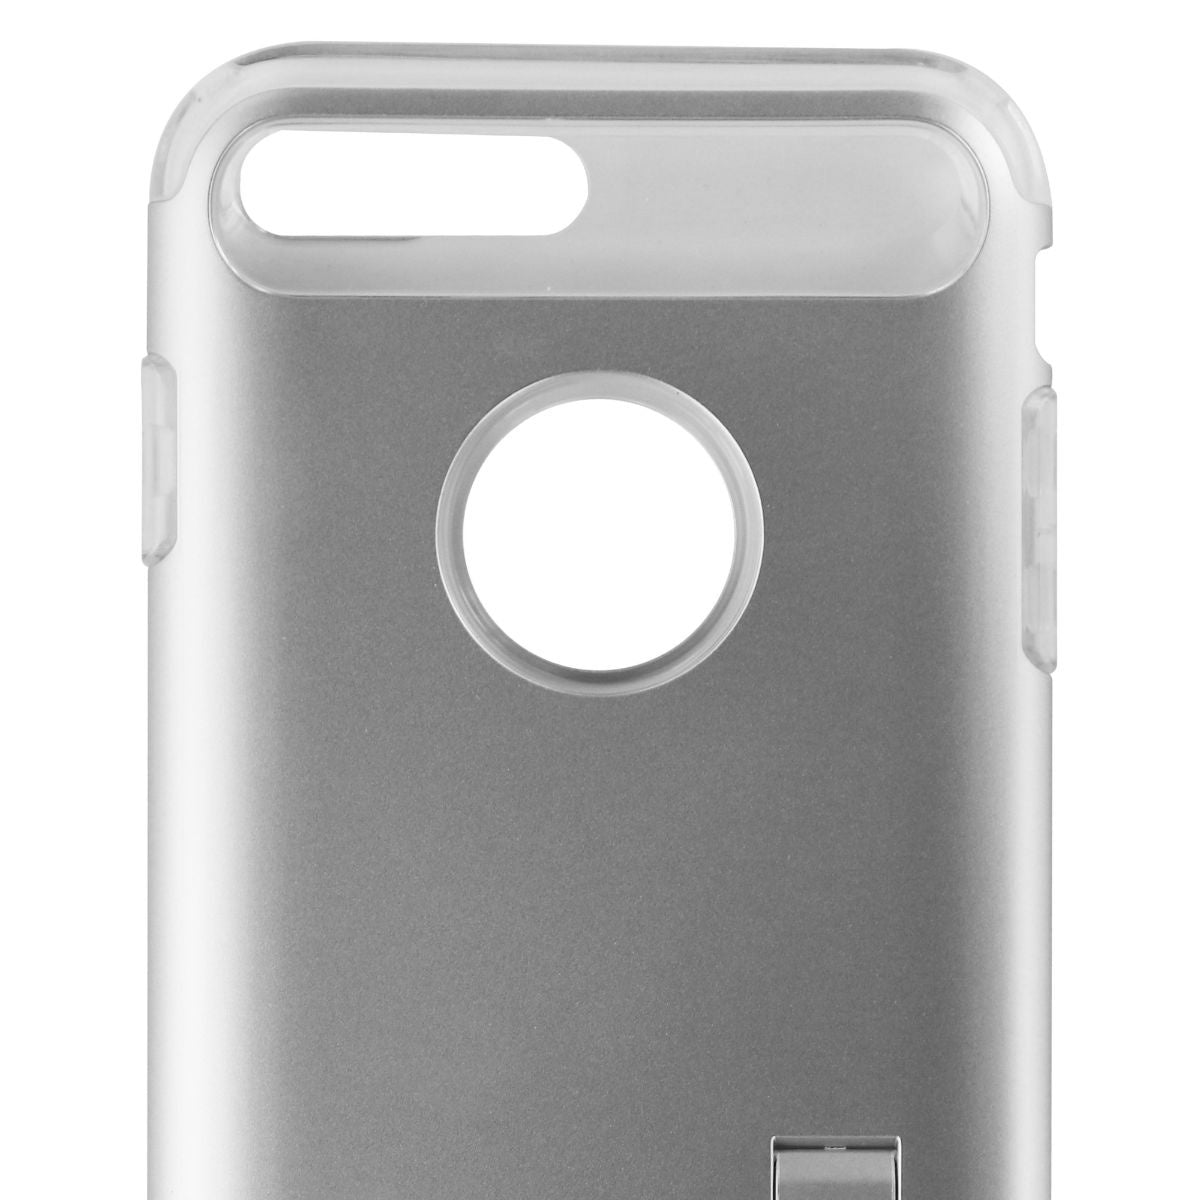 Spigen Slim Armor Series Dual Layer Case for iPhone 8 Plus/7 Plus - Silver/Clear Cell Phone - Cases, Covers & Skins Spigen    - Simple Cell Bulk Wholesale Pricing - USA Seller